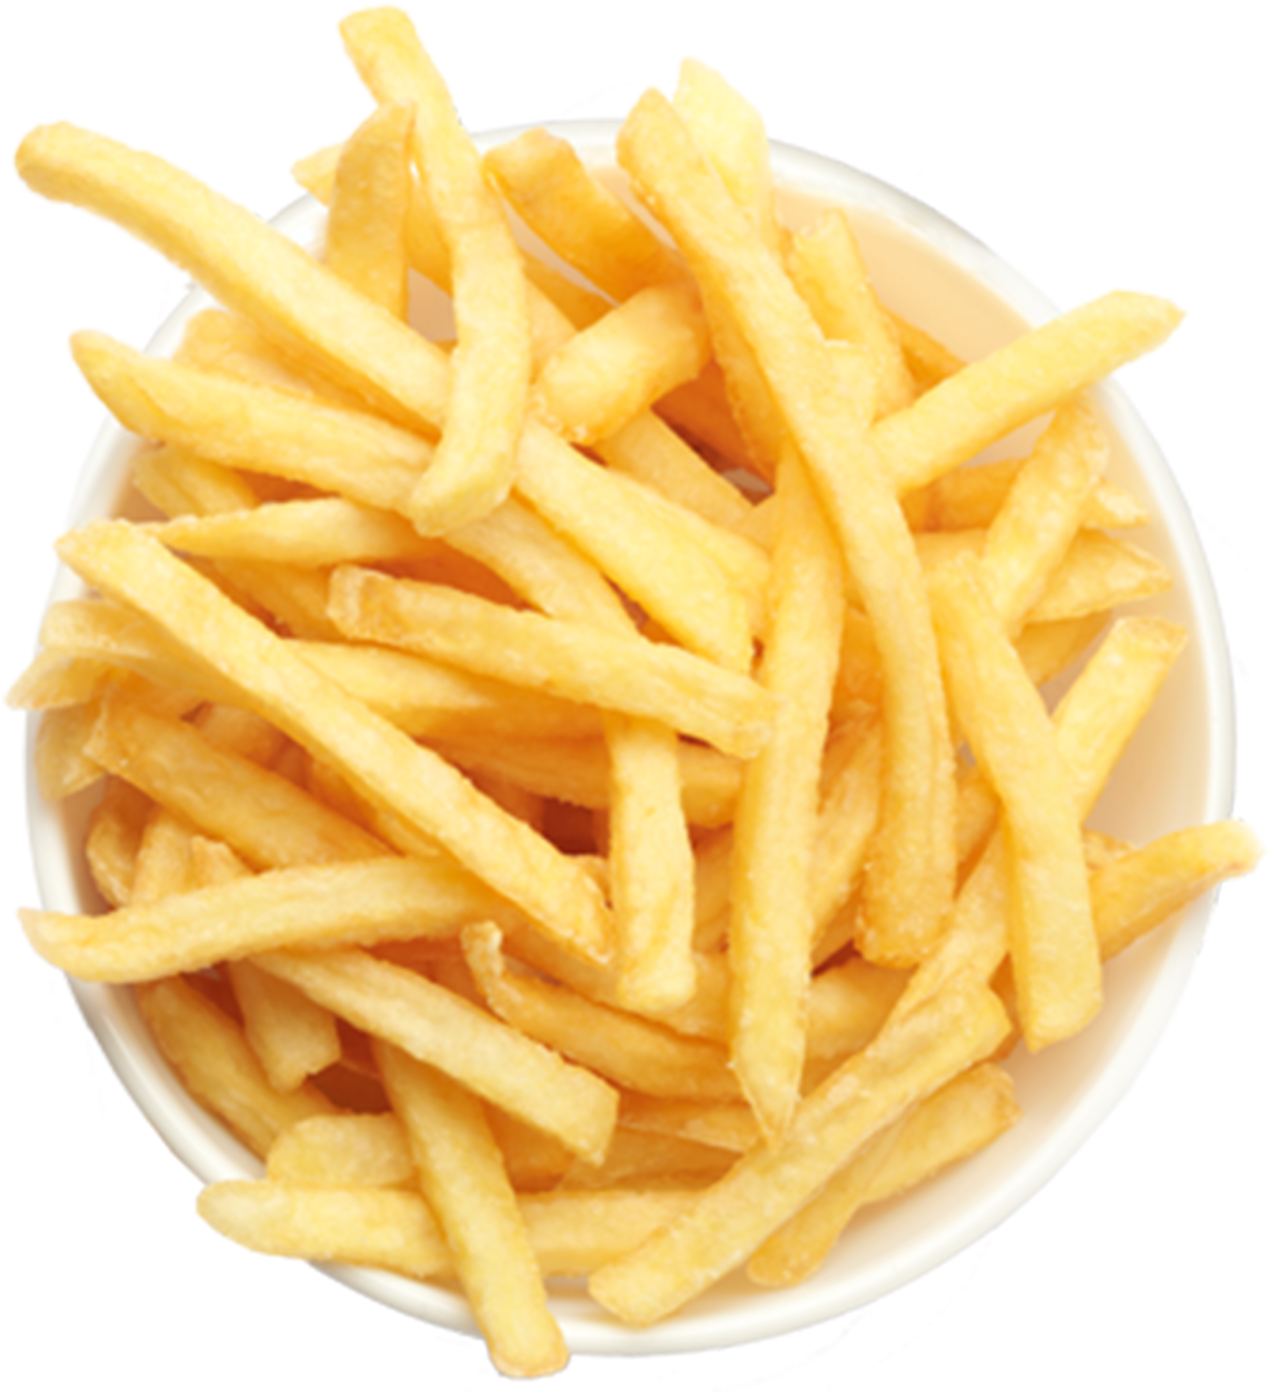 A Bowl Of French Fries